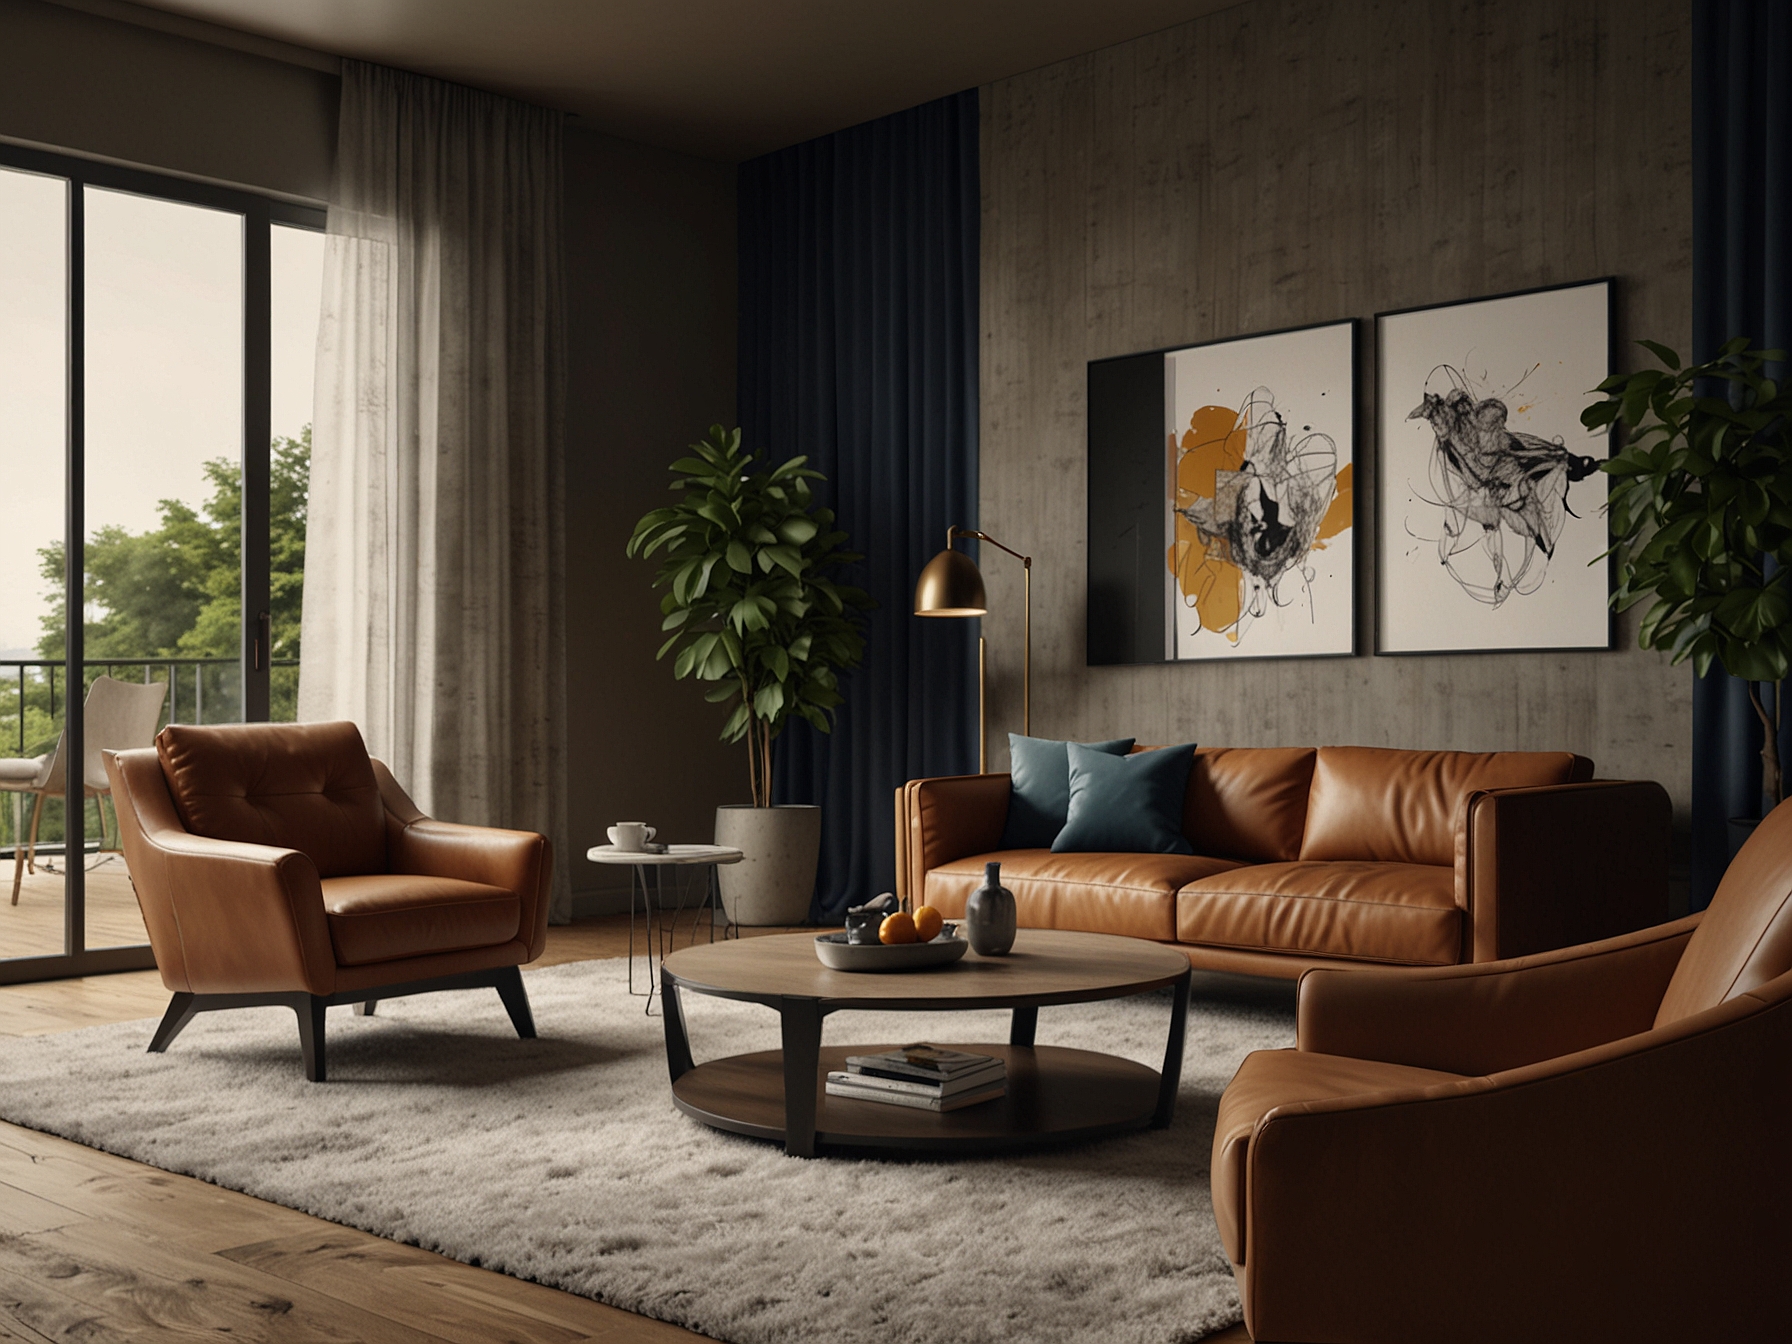 A living room setup with a luxurious recliner, modern ergonomic chairs, and a stylish coffee table, perfect for enjoying the World Cup finals in comfort and style.